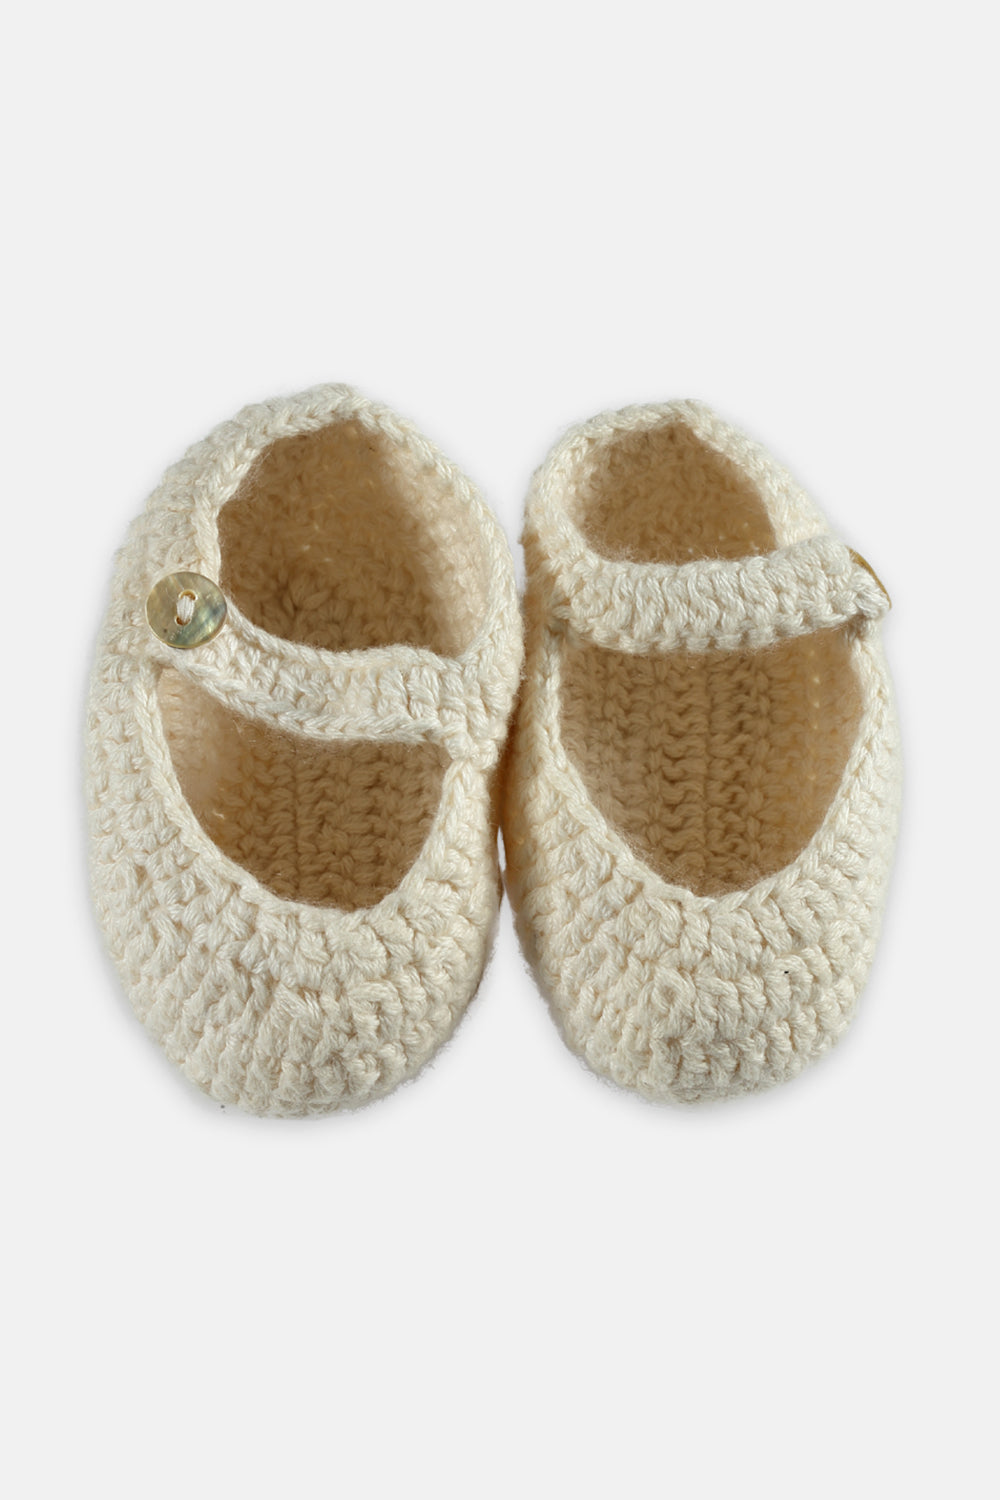 Ivory Booties & Cap Set For Babies – The Baby Trunk